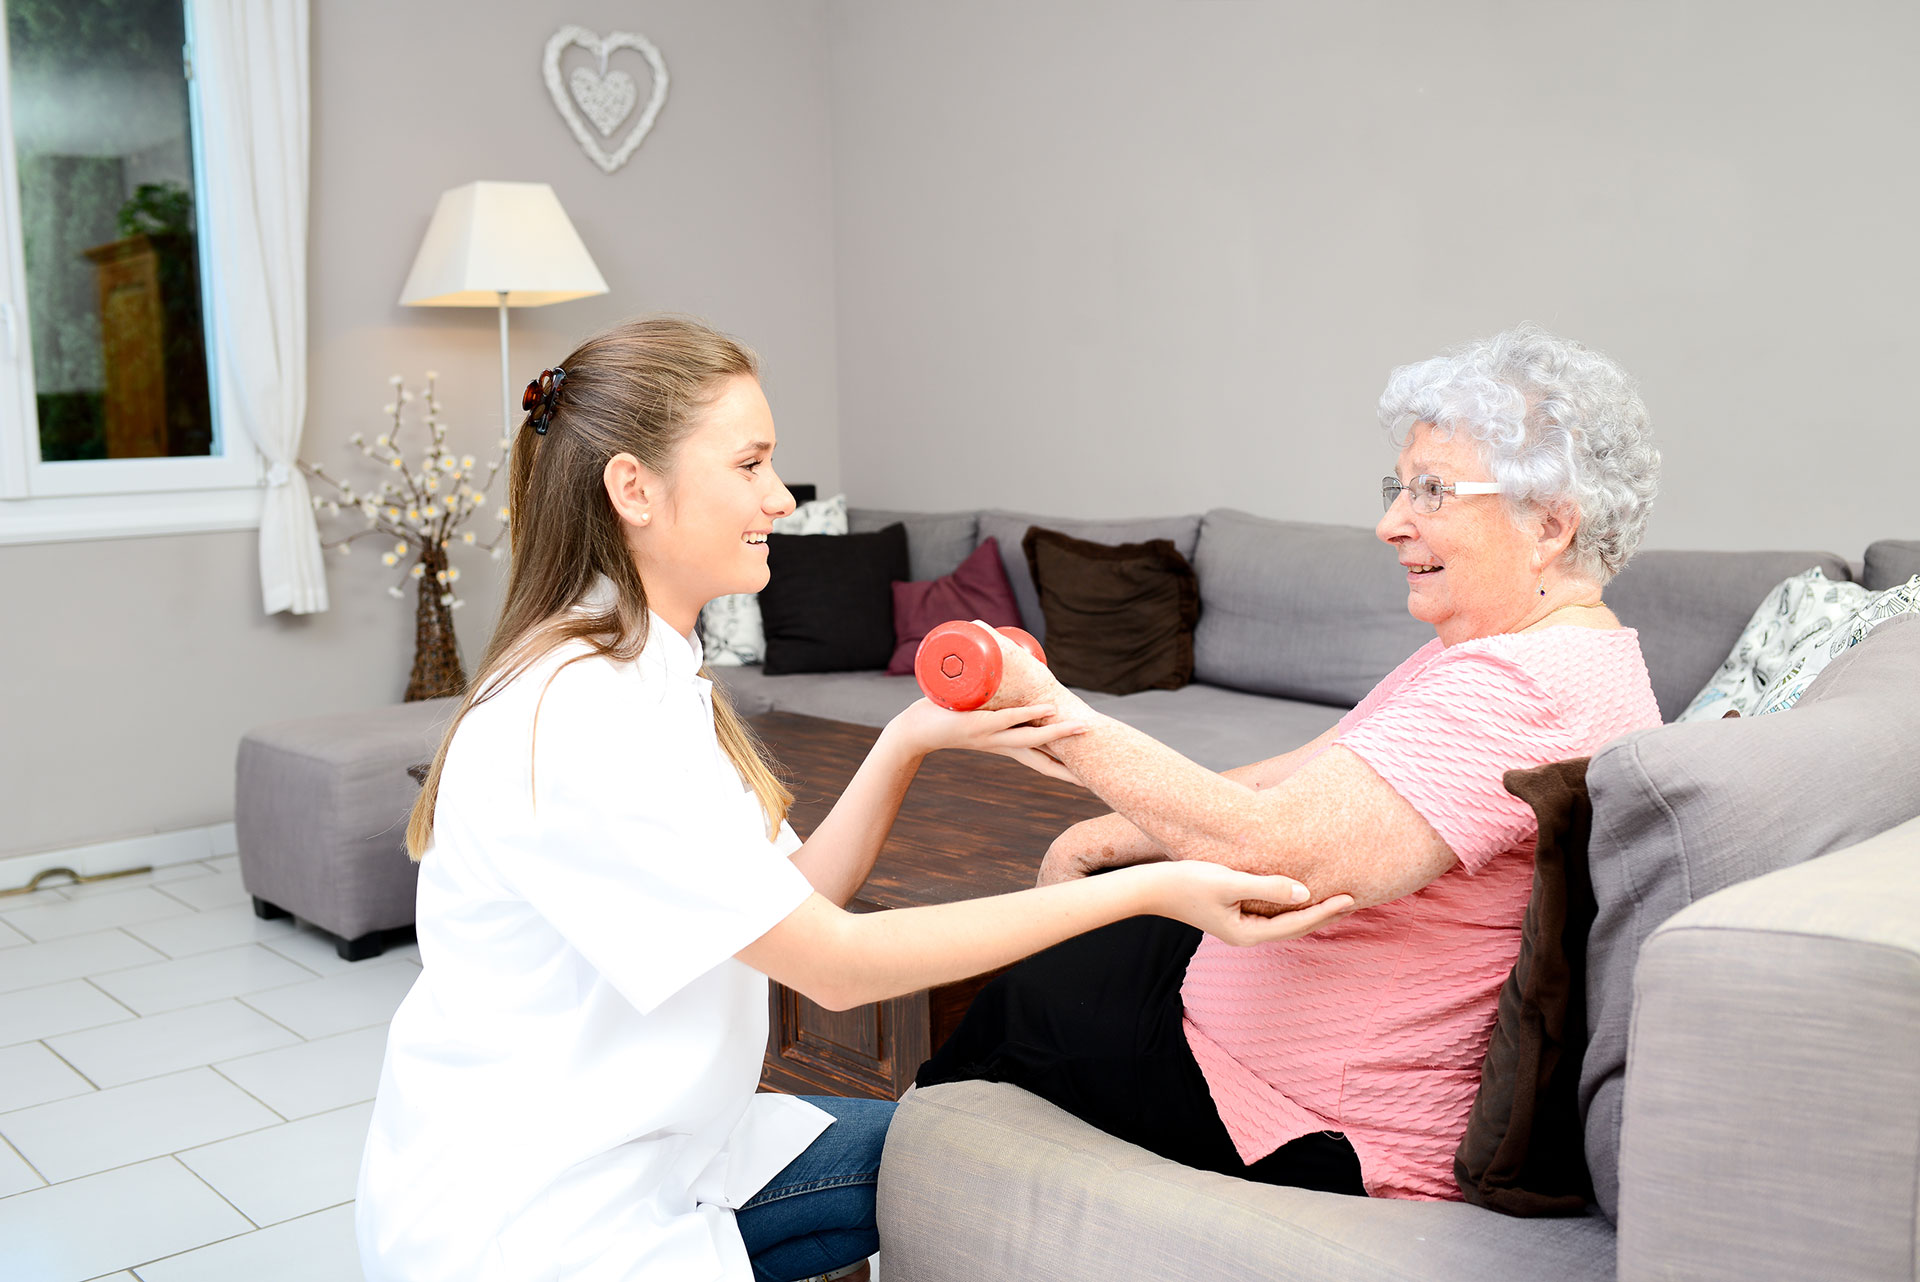 Physiotherapy and rehabilitation in the home